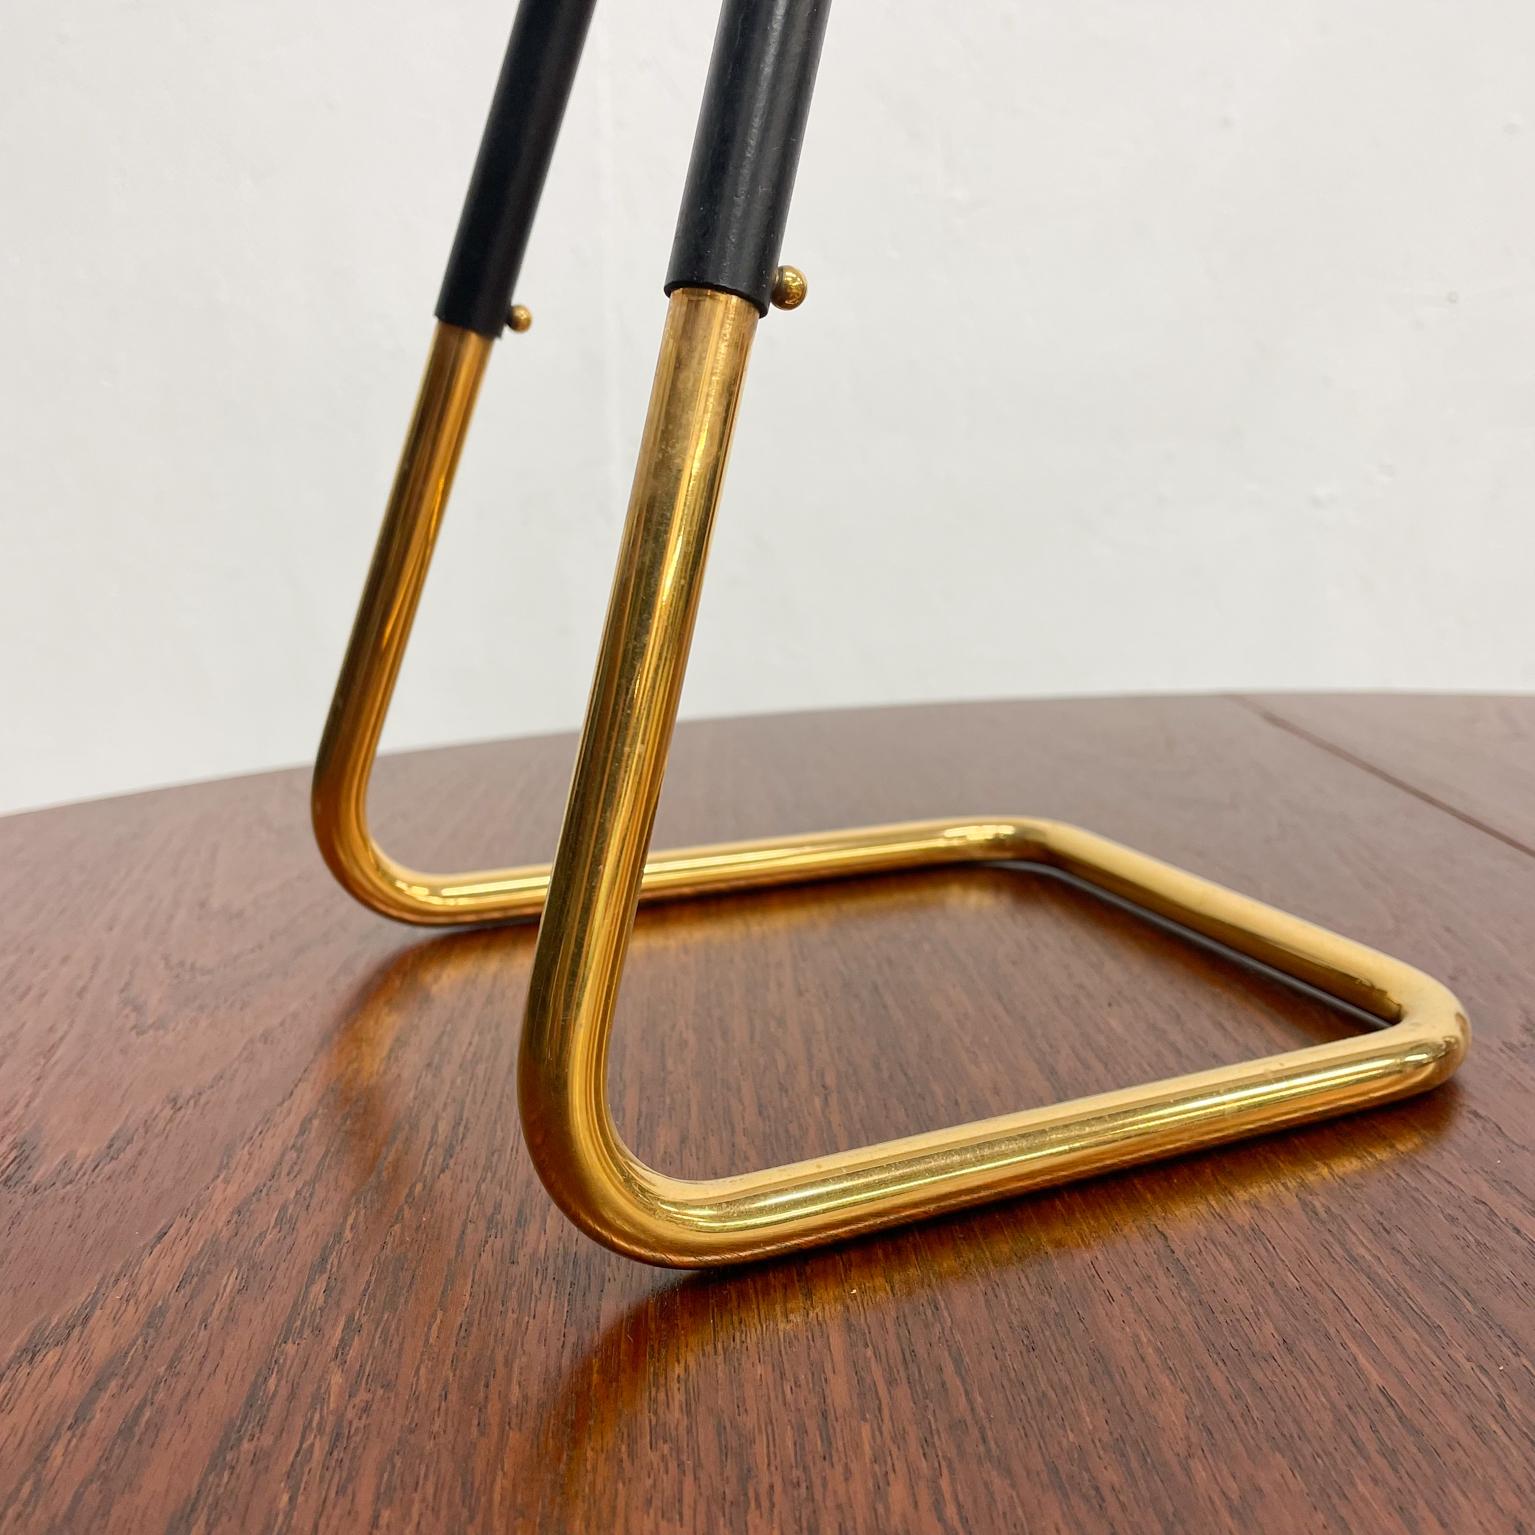 Mid-Century Modern Sculptural Umbrella Stand Polished Brass Italy 1950s Modernist Style Ico Parisi